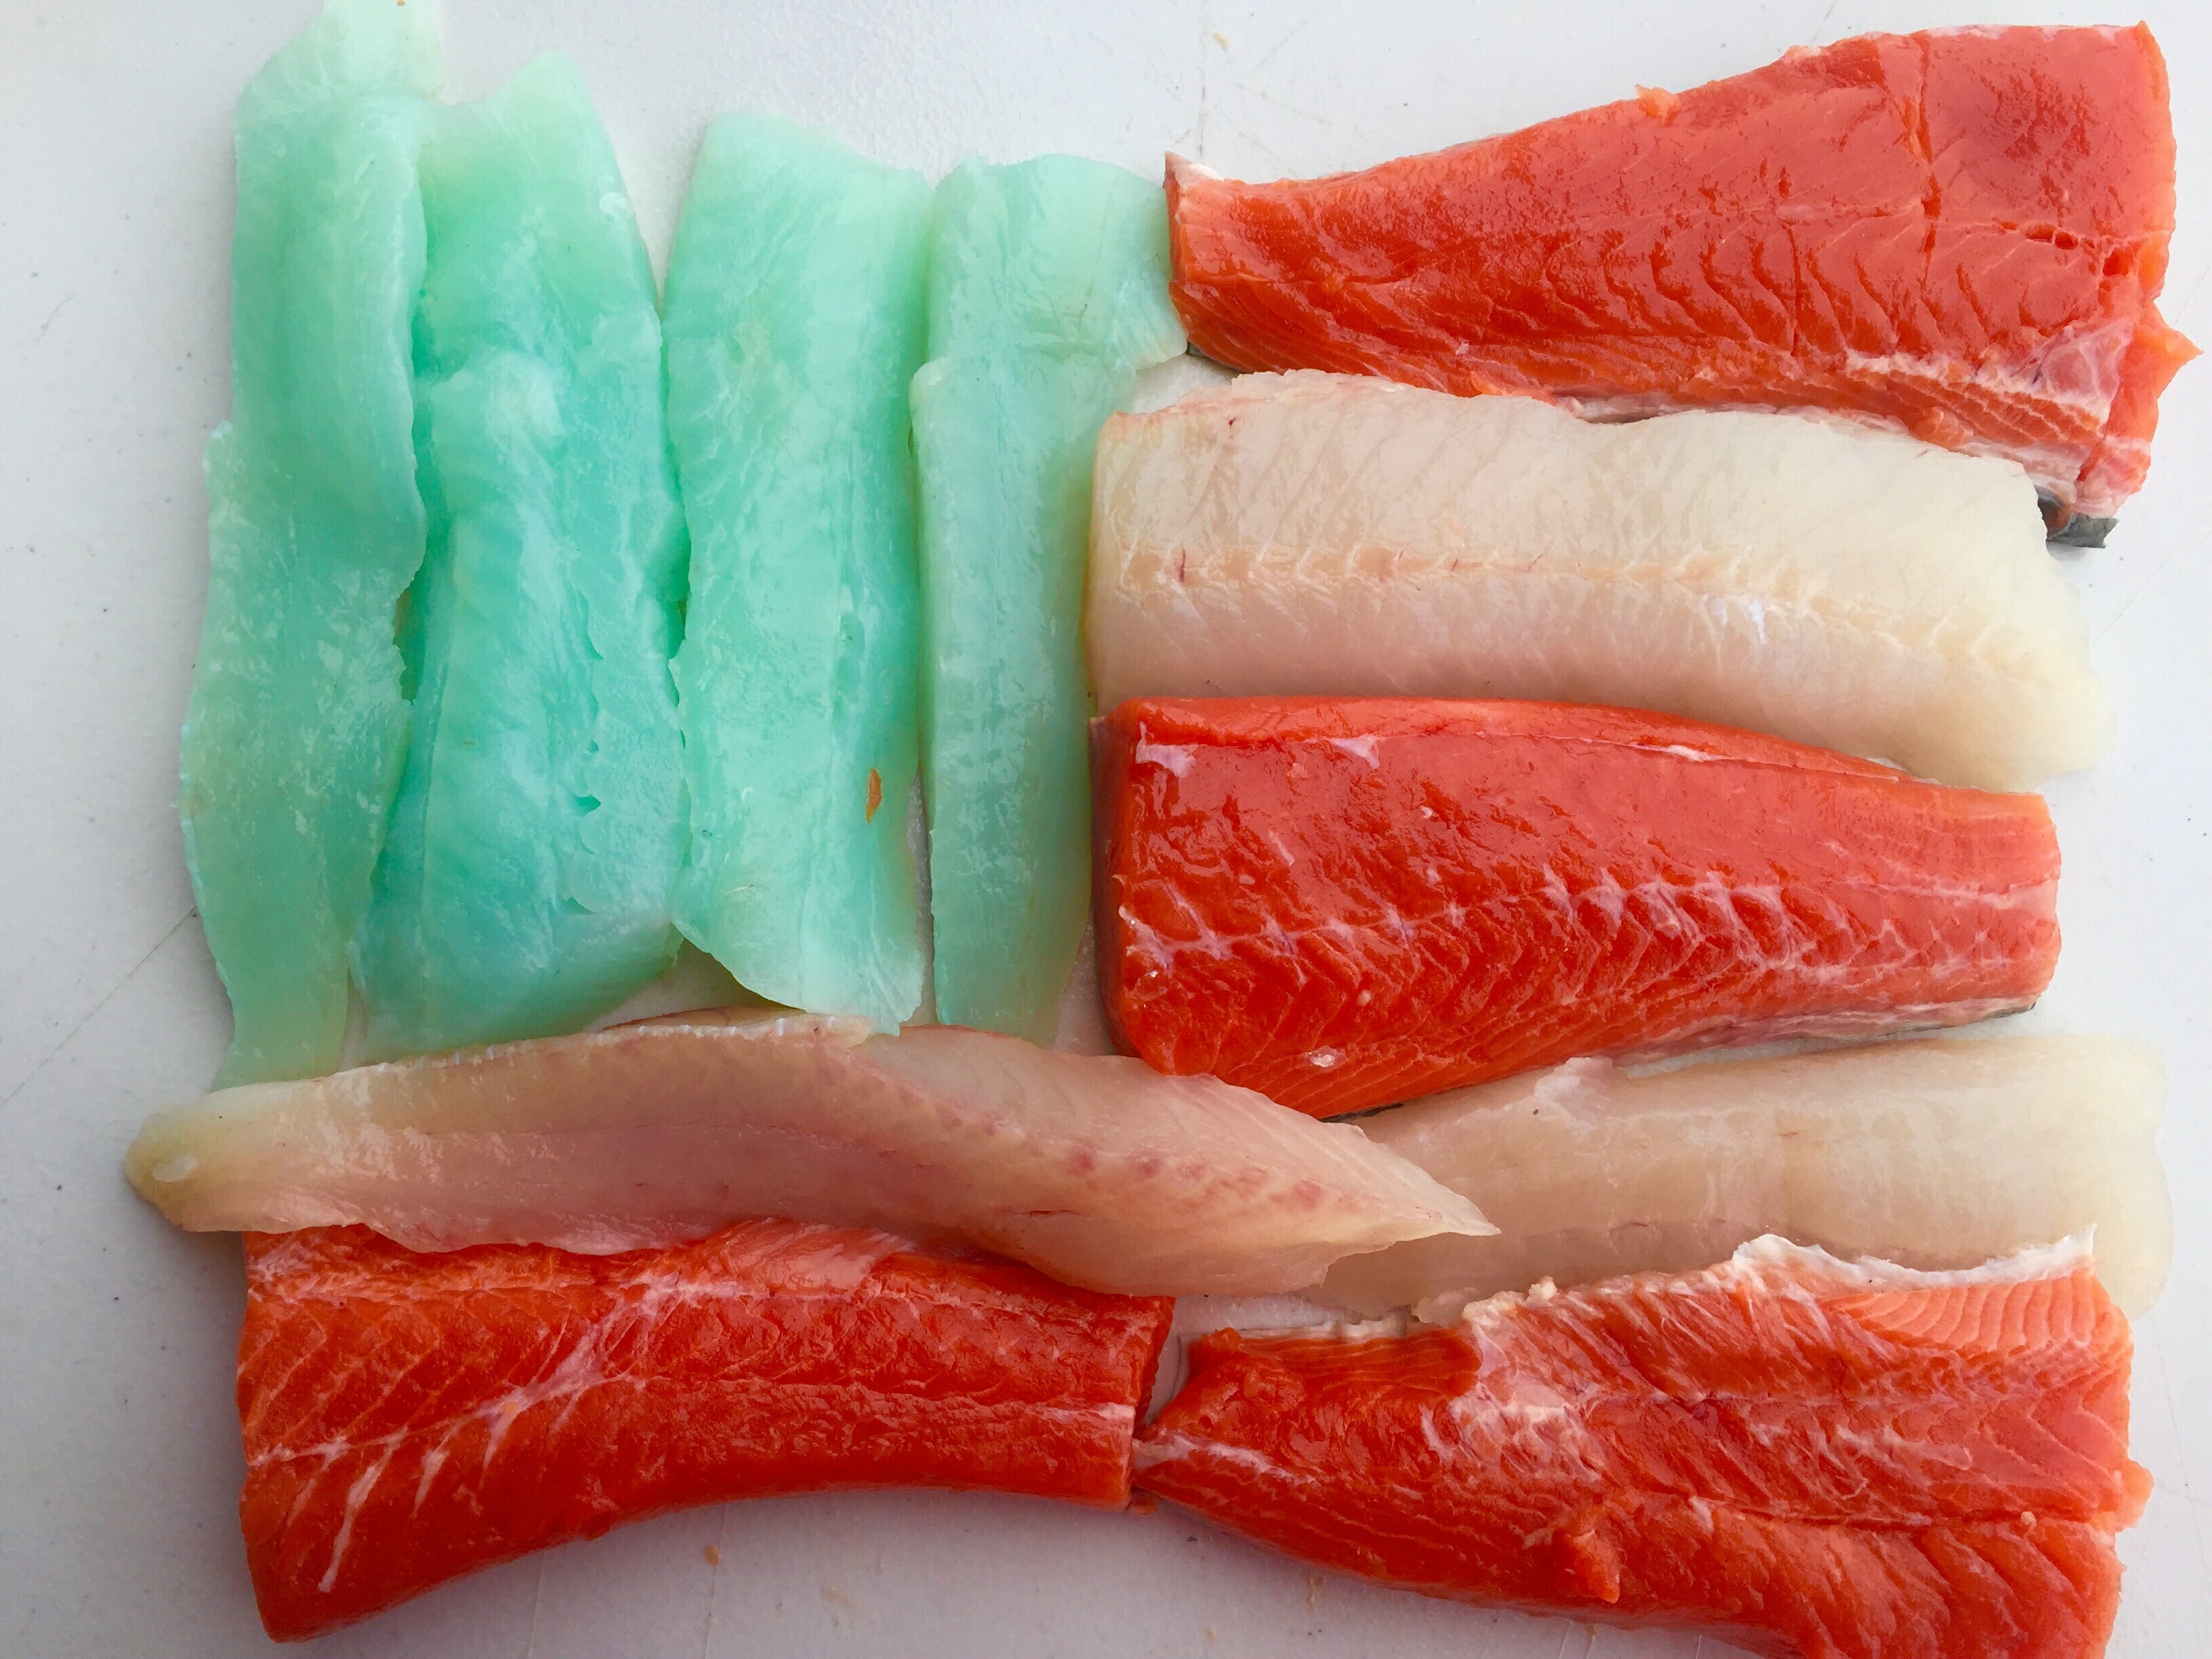 red-fish-blue-fish-what-s-up-with-all-the-different-colors-of-fish-flesh